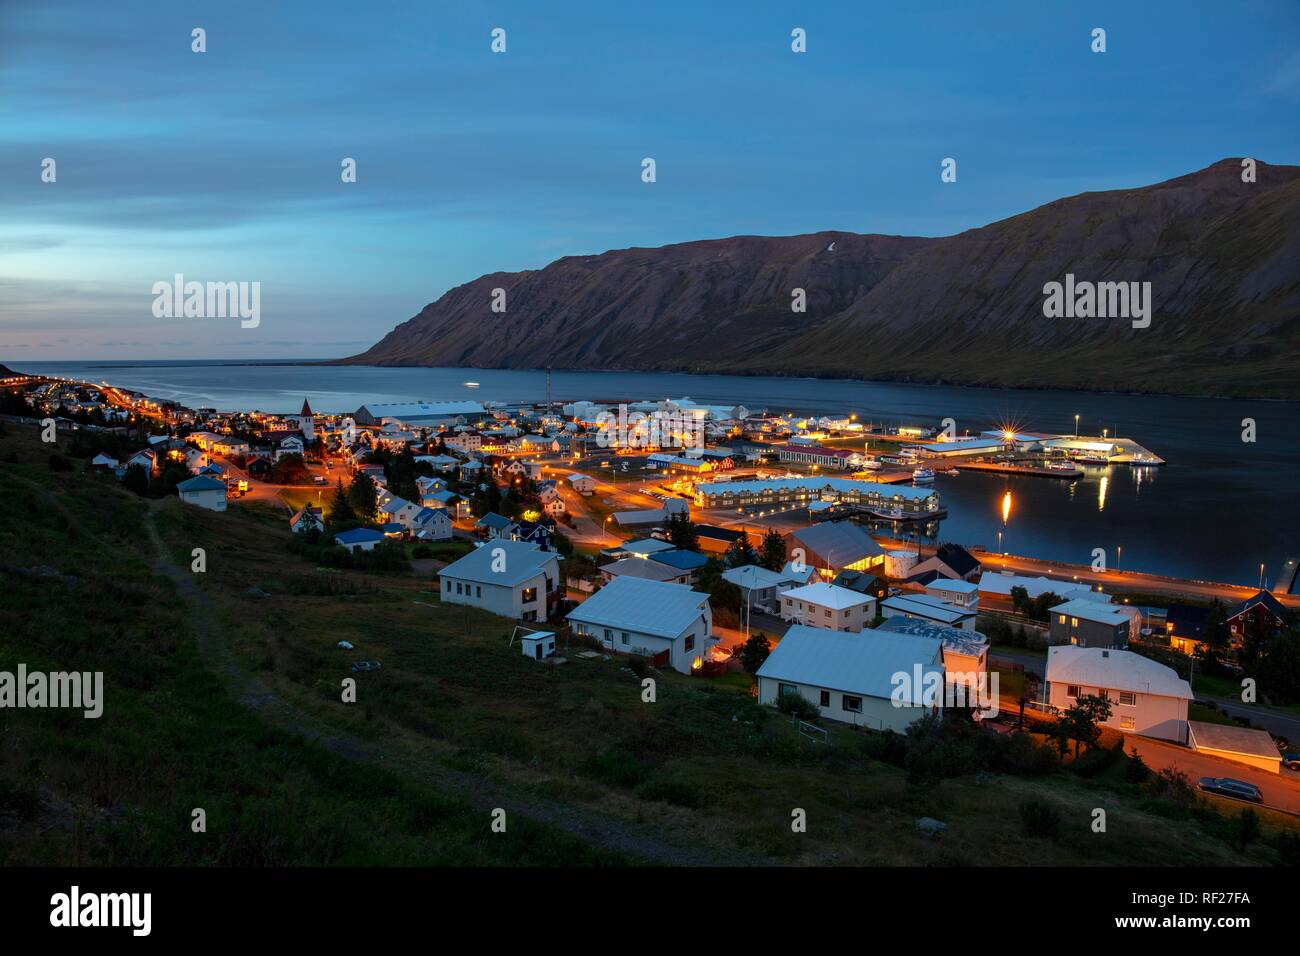 View of the fjord and town, Siglufjörður; Iceland Stock Photo